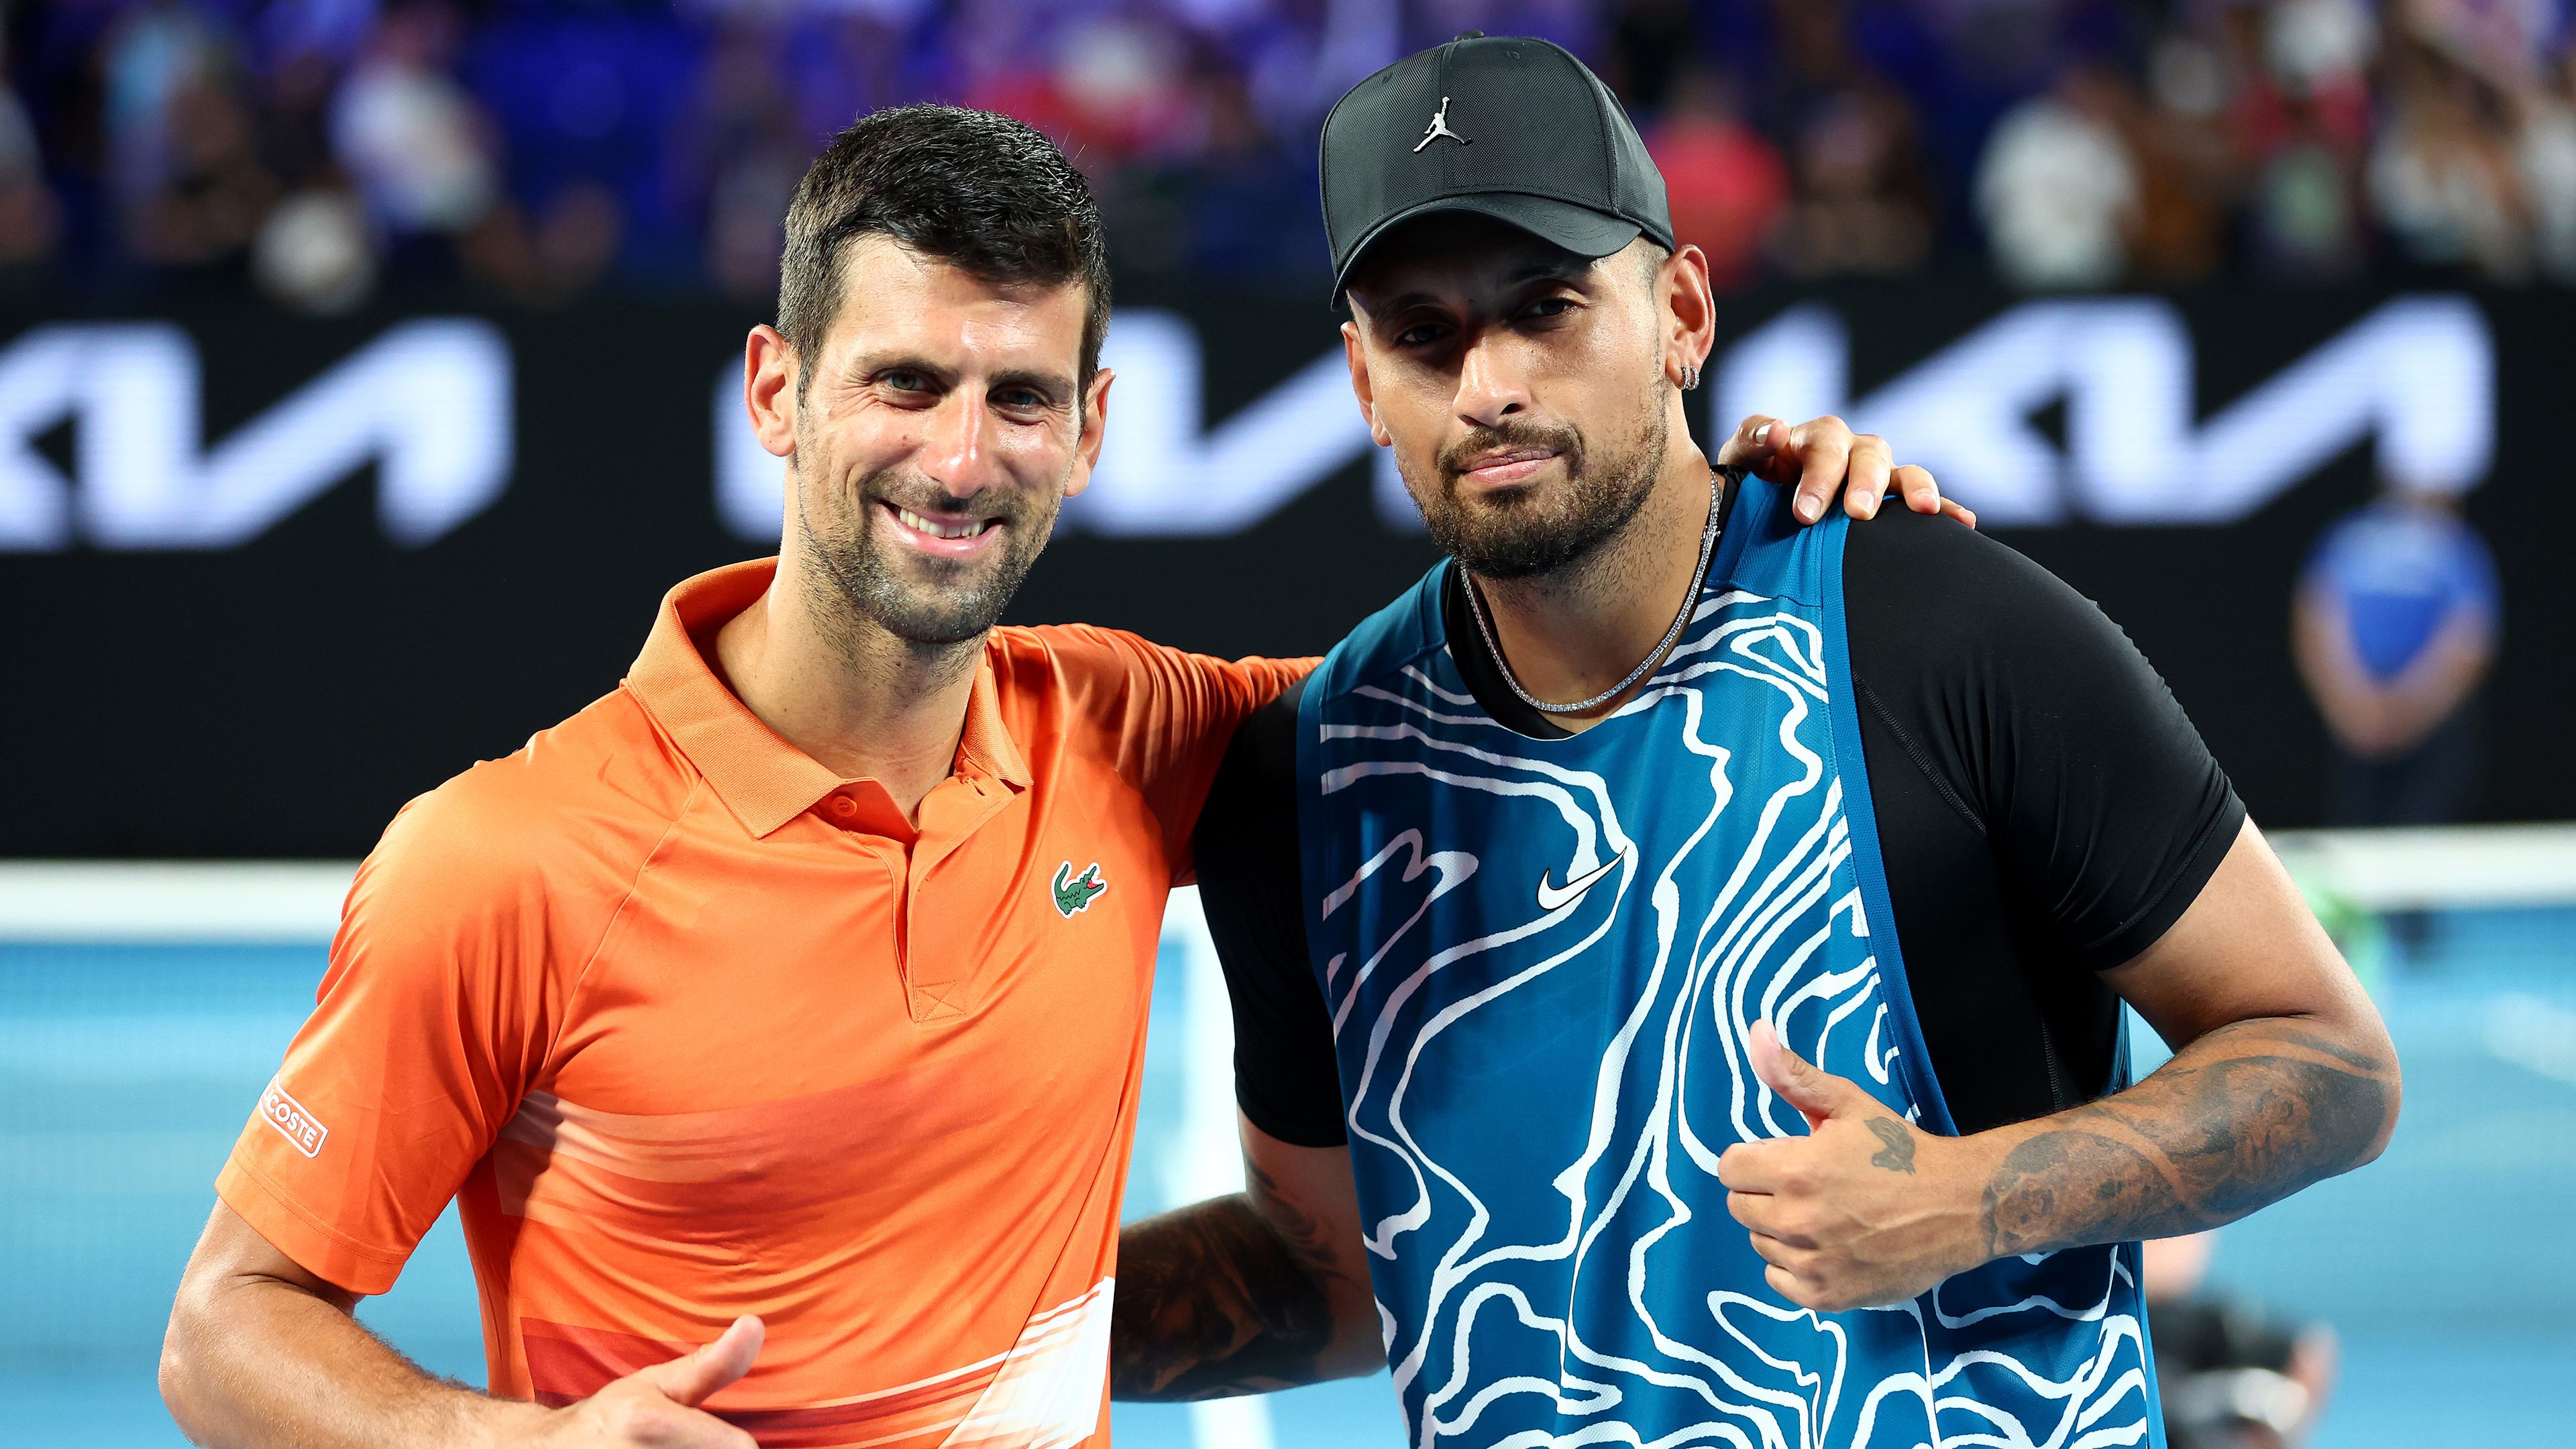 EXCLUSIVE: Can anyone beat Novak Djokovic? Wally Masur believes an Aussie star has exactly what it takes